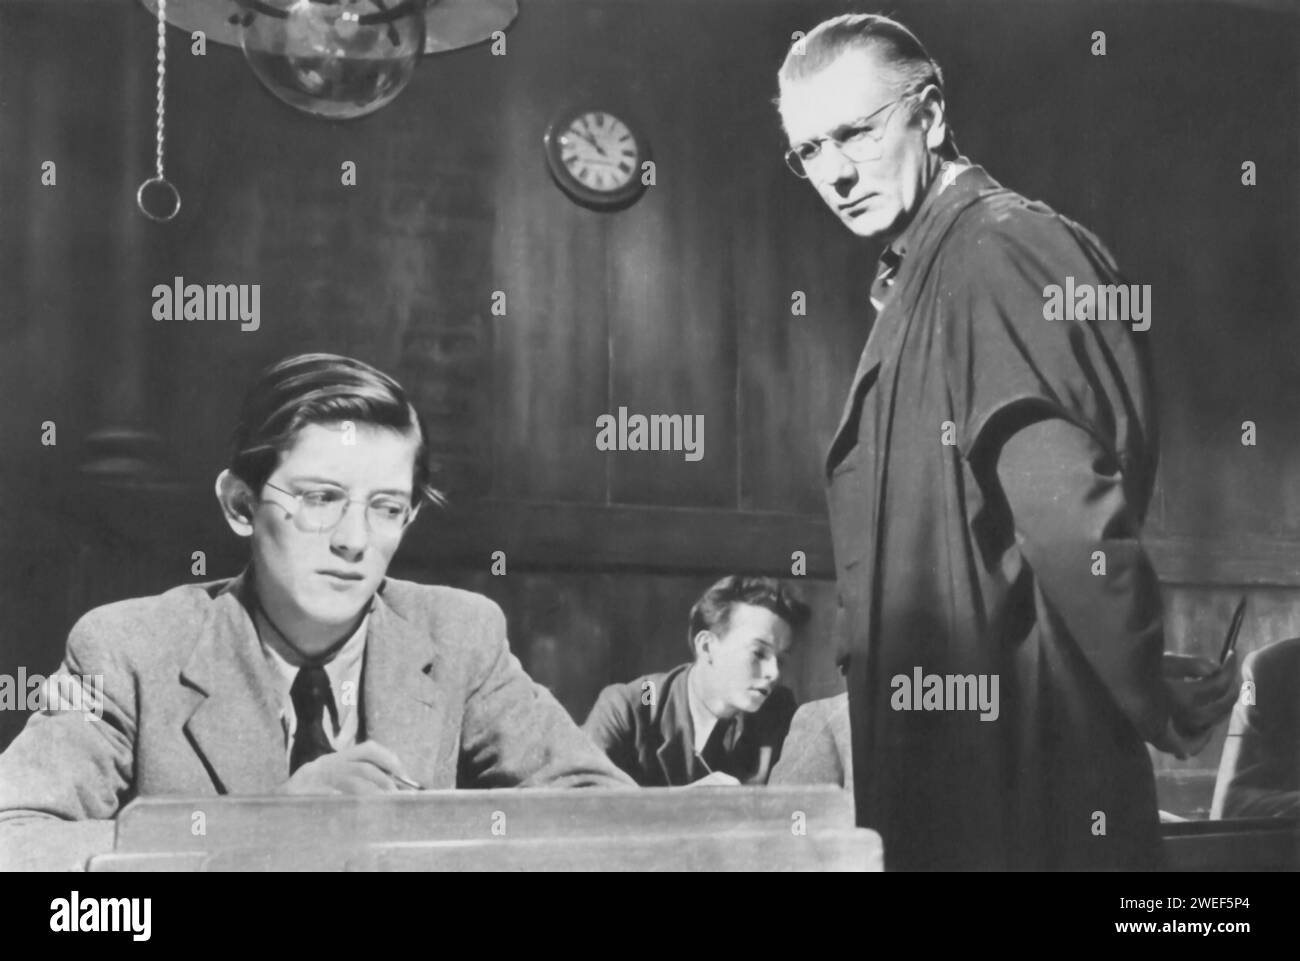 Michael Redgrave stars in 'The Browning Version' (1951), a British drama film. In this adaptation of Terence Rattigan's play, Redgrave portrays Andrew Crocker-Harris, a classics teacher at an English boys' school. The film delves into Crocker-Harris's personal and professional crises, as he confronts his failings and disillusionments both in his career and marriage. Stock Photo